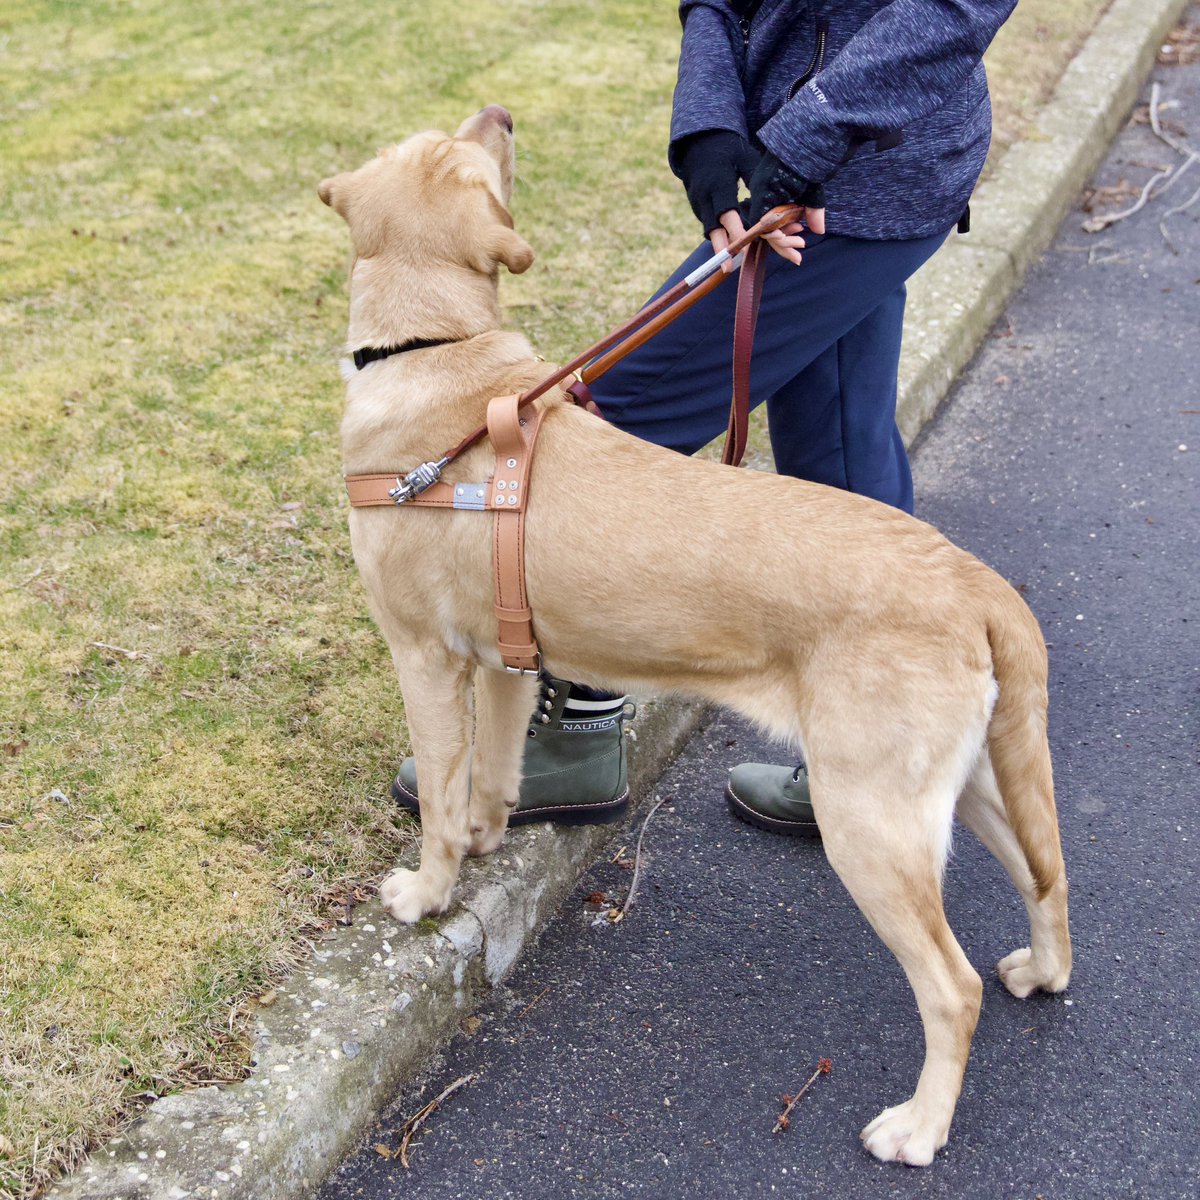 “Find the curb!”🚨 Mastering this command is crucial for guide dogs as they ensure the safety of their low vision or legally blind handlers, especially on streets without sidewalks.